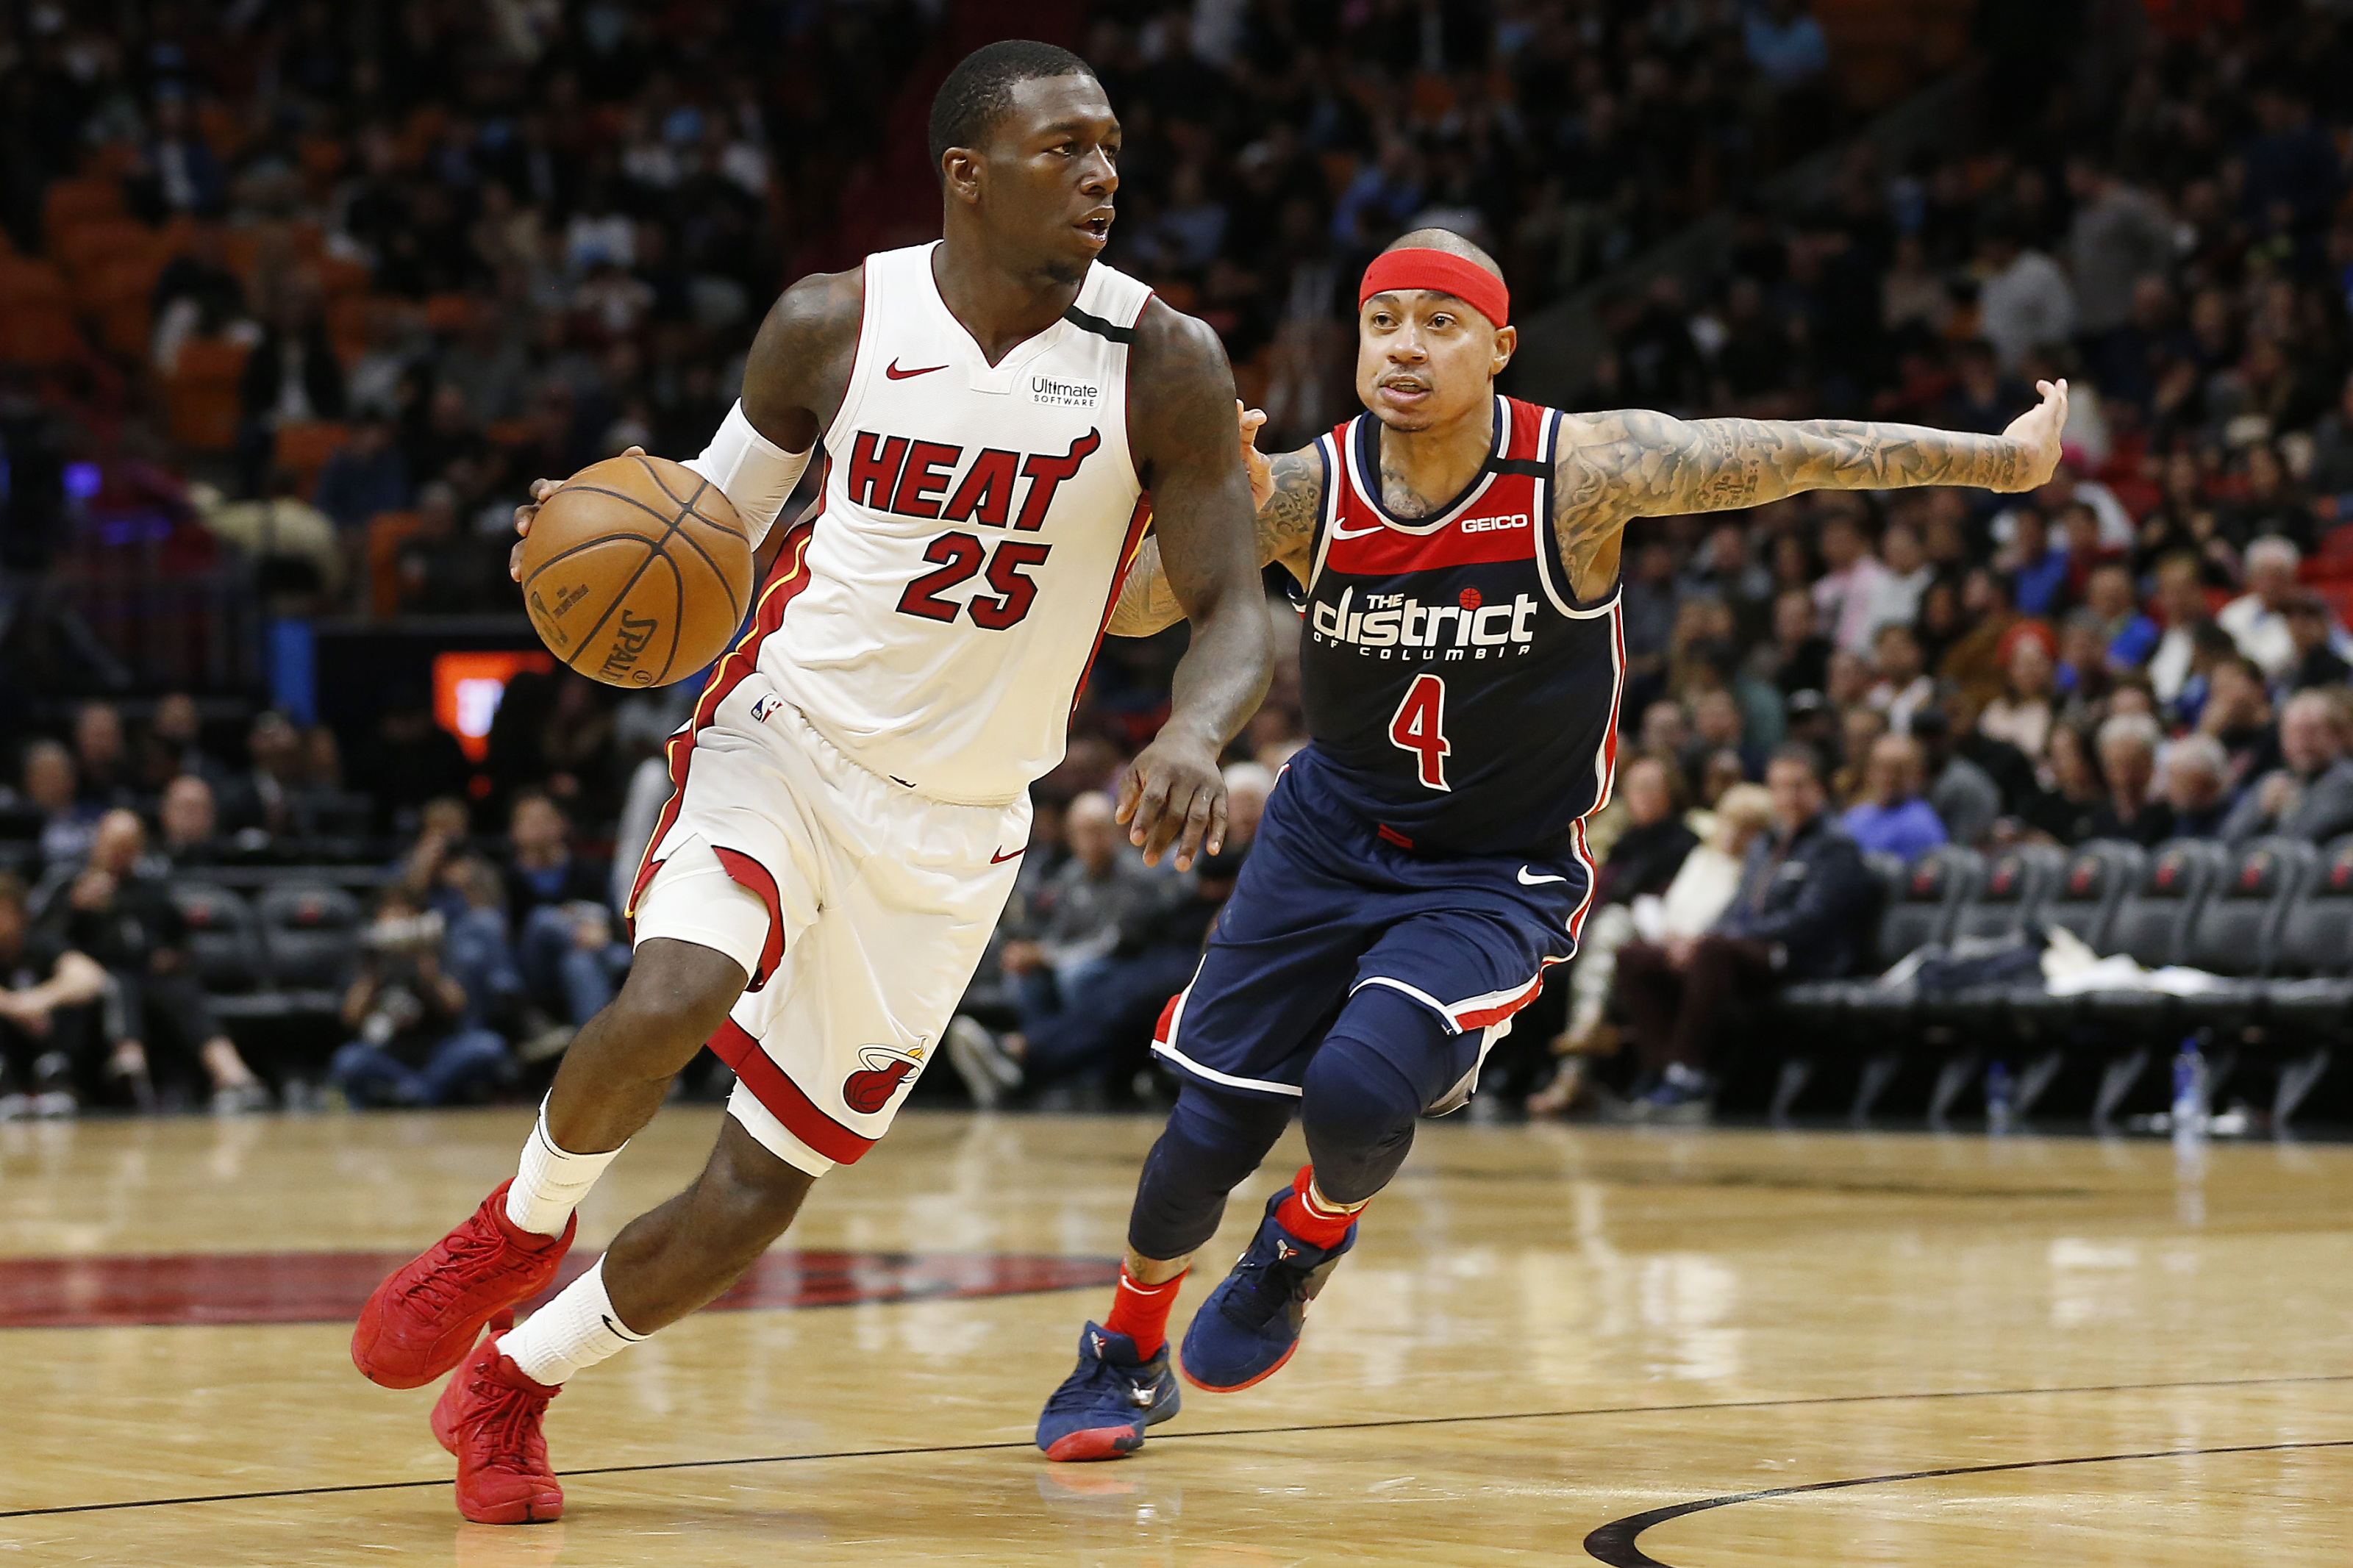 Isaiah Thomas Q&A: 'I'd love to be a part of what Boston has going